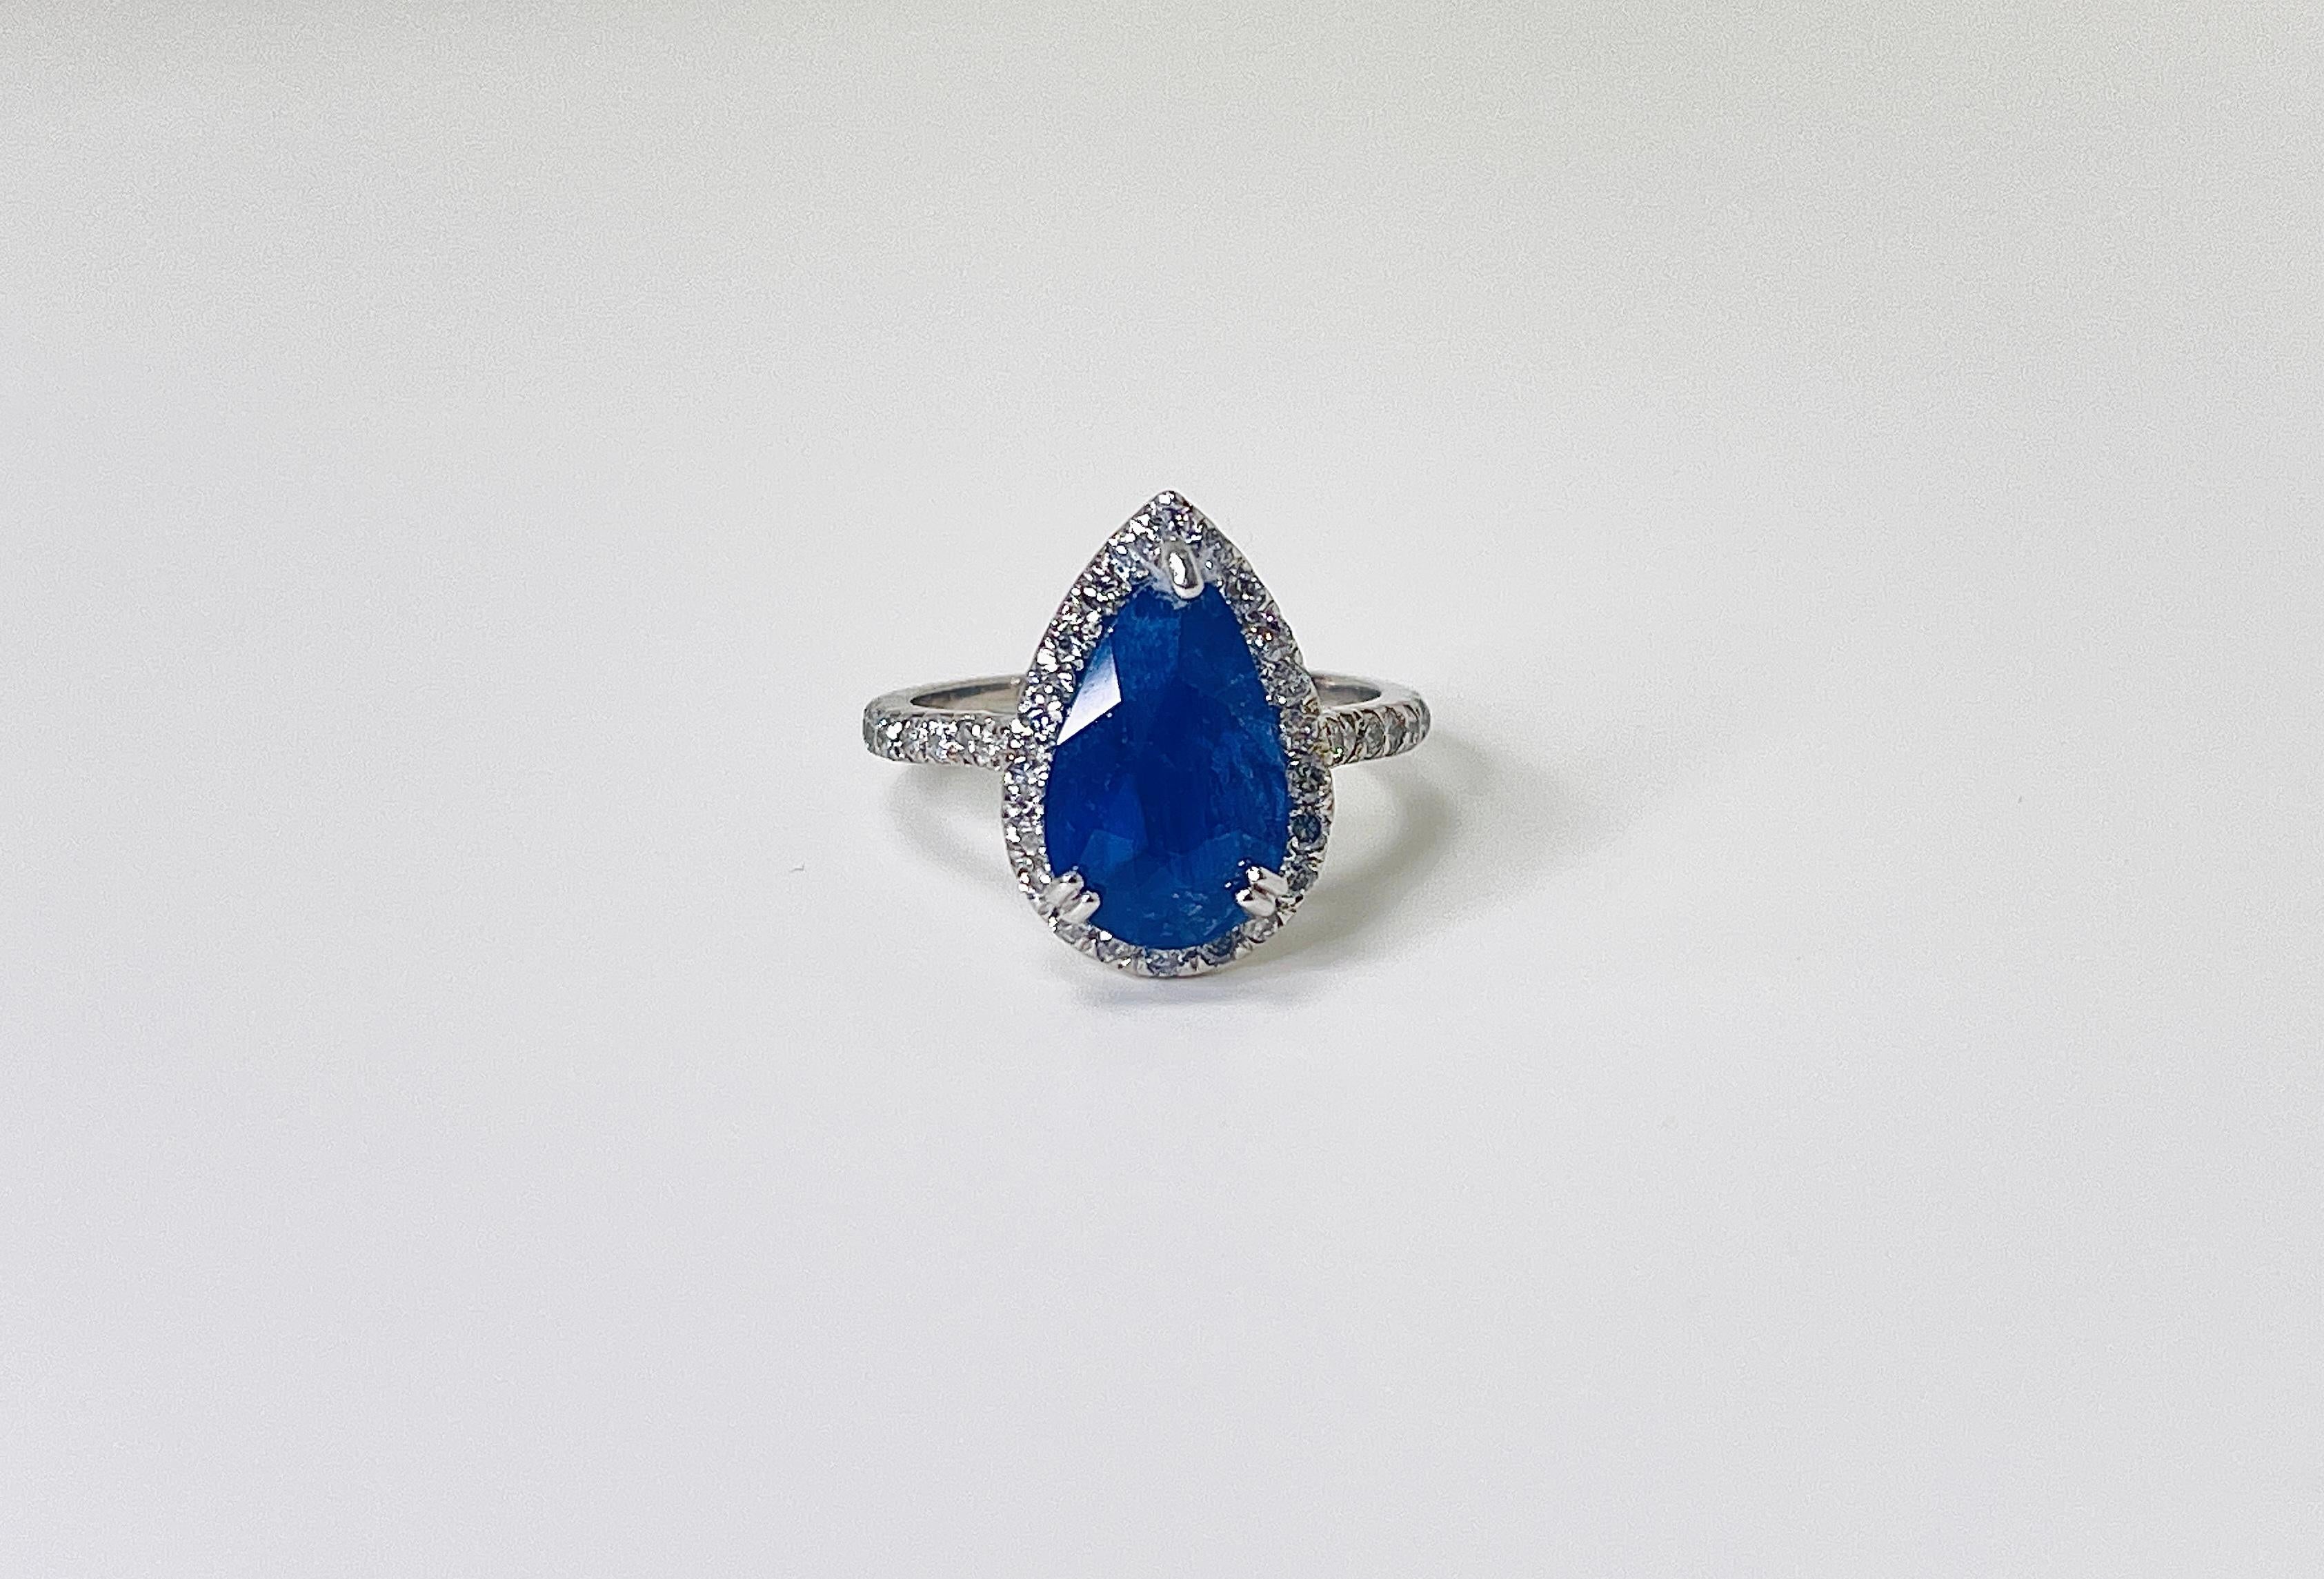 1.29 Carat Intense Blue Pear Shape Cut Natural Sapphire Diamond 14K White Gold Ring

1.29 Carats Natural Heat Sapphire Center Stone
0.70 Carats 29 Pieces Diamonds
Average G-I, 3.57 grams, size 6

*Free shipping within the U.S.*
